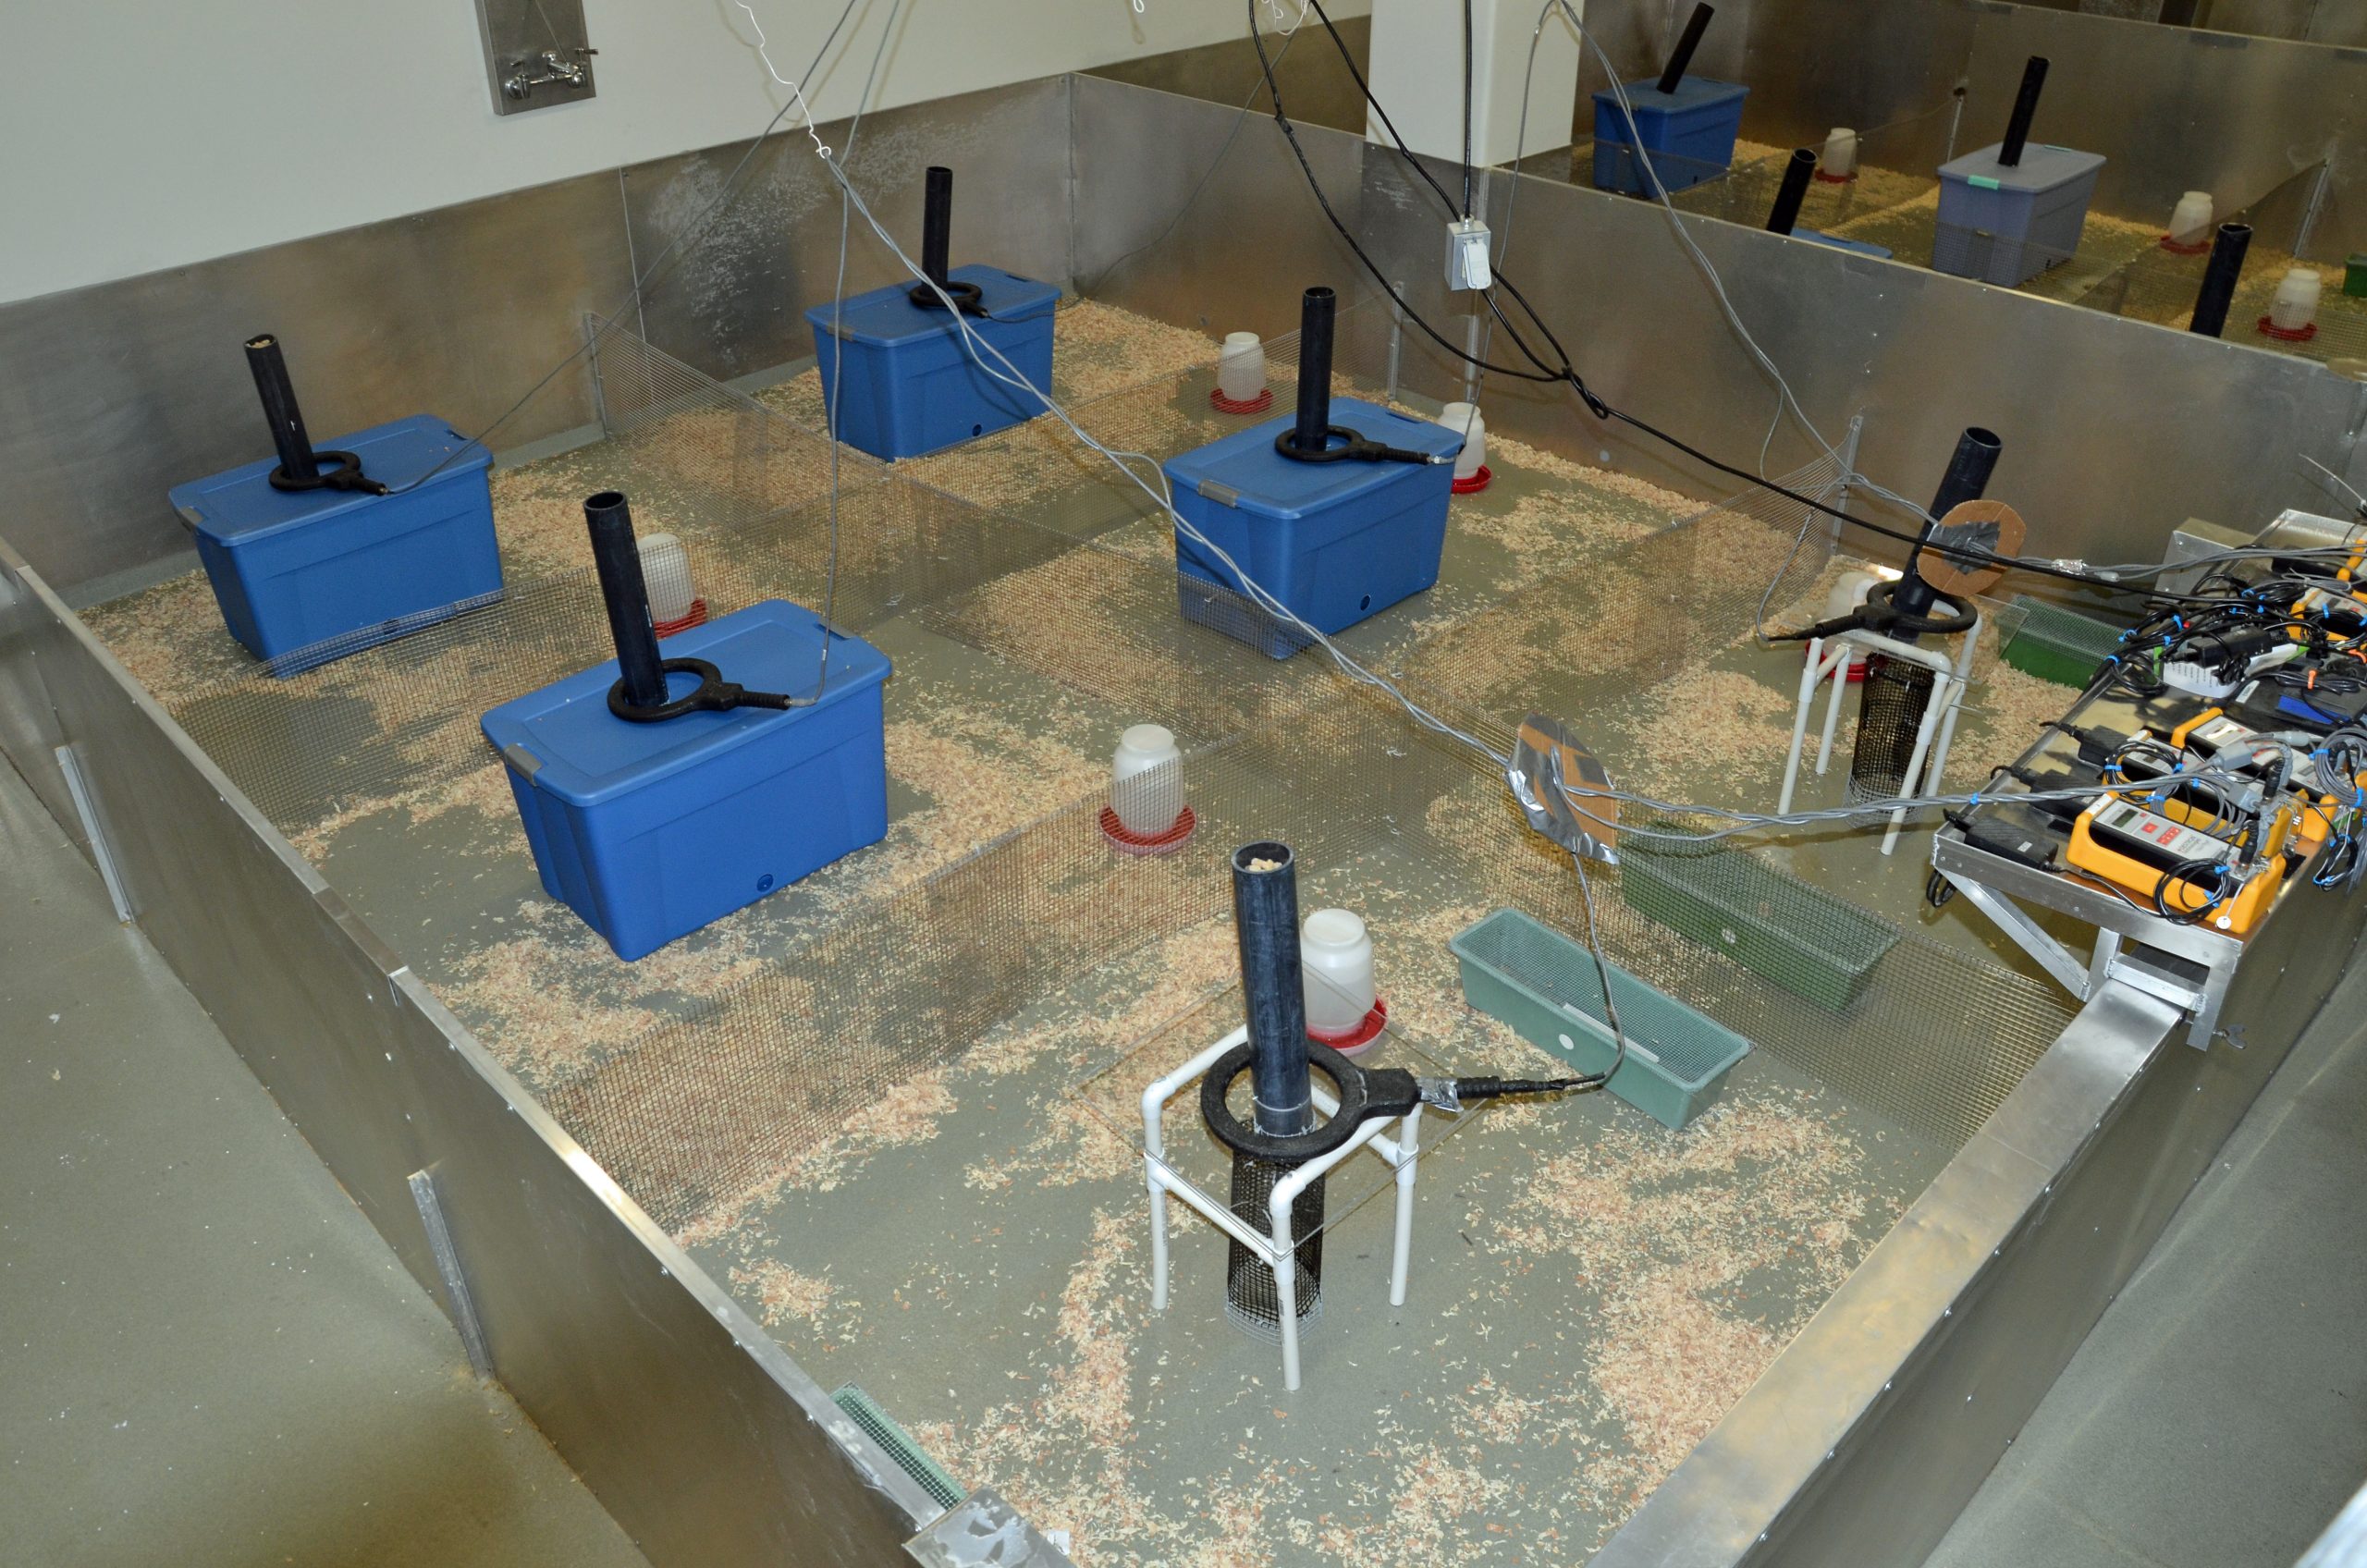 A “mouse barn” such as the one shown here at the University of Utah is the heart of a new, sensitive toxicity test that allows house-type mice to compete in a seminatural environment so researchers can measure how exposure to sugar, medicines and other substances affects the mice in terms of their survival, reproduction and ability to hold territory. The blue tubs and green trays are nesting boxes, protected and unprotected, respectively. The feeding stations (vertical tubes) have sensor rings around them to detect transmitter chips implanted in male mice – a way to determine which males hold which territories.